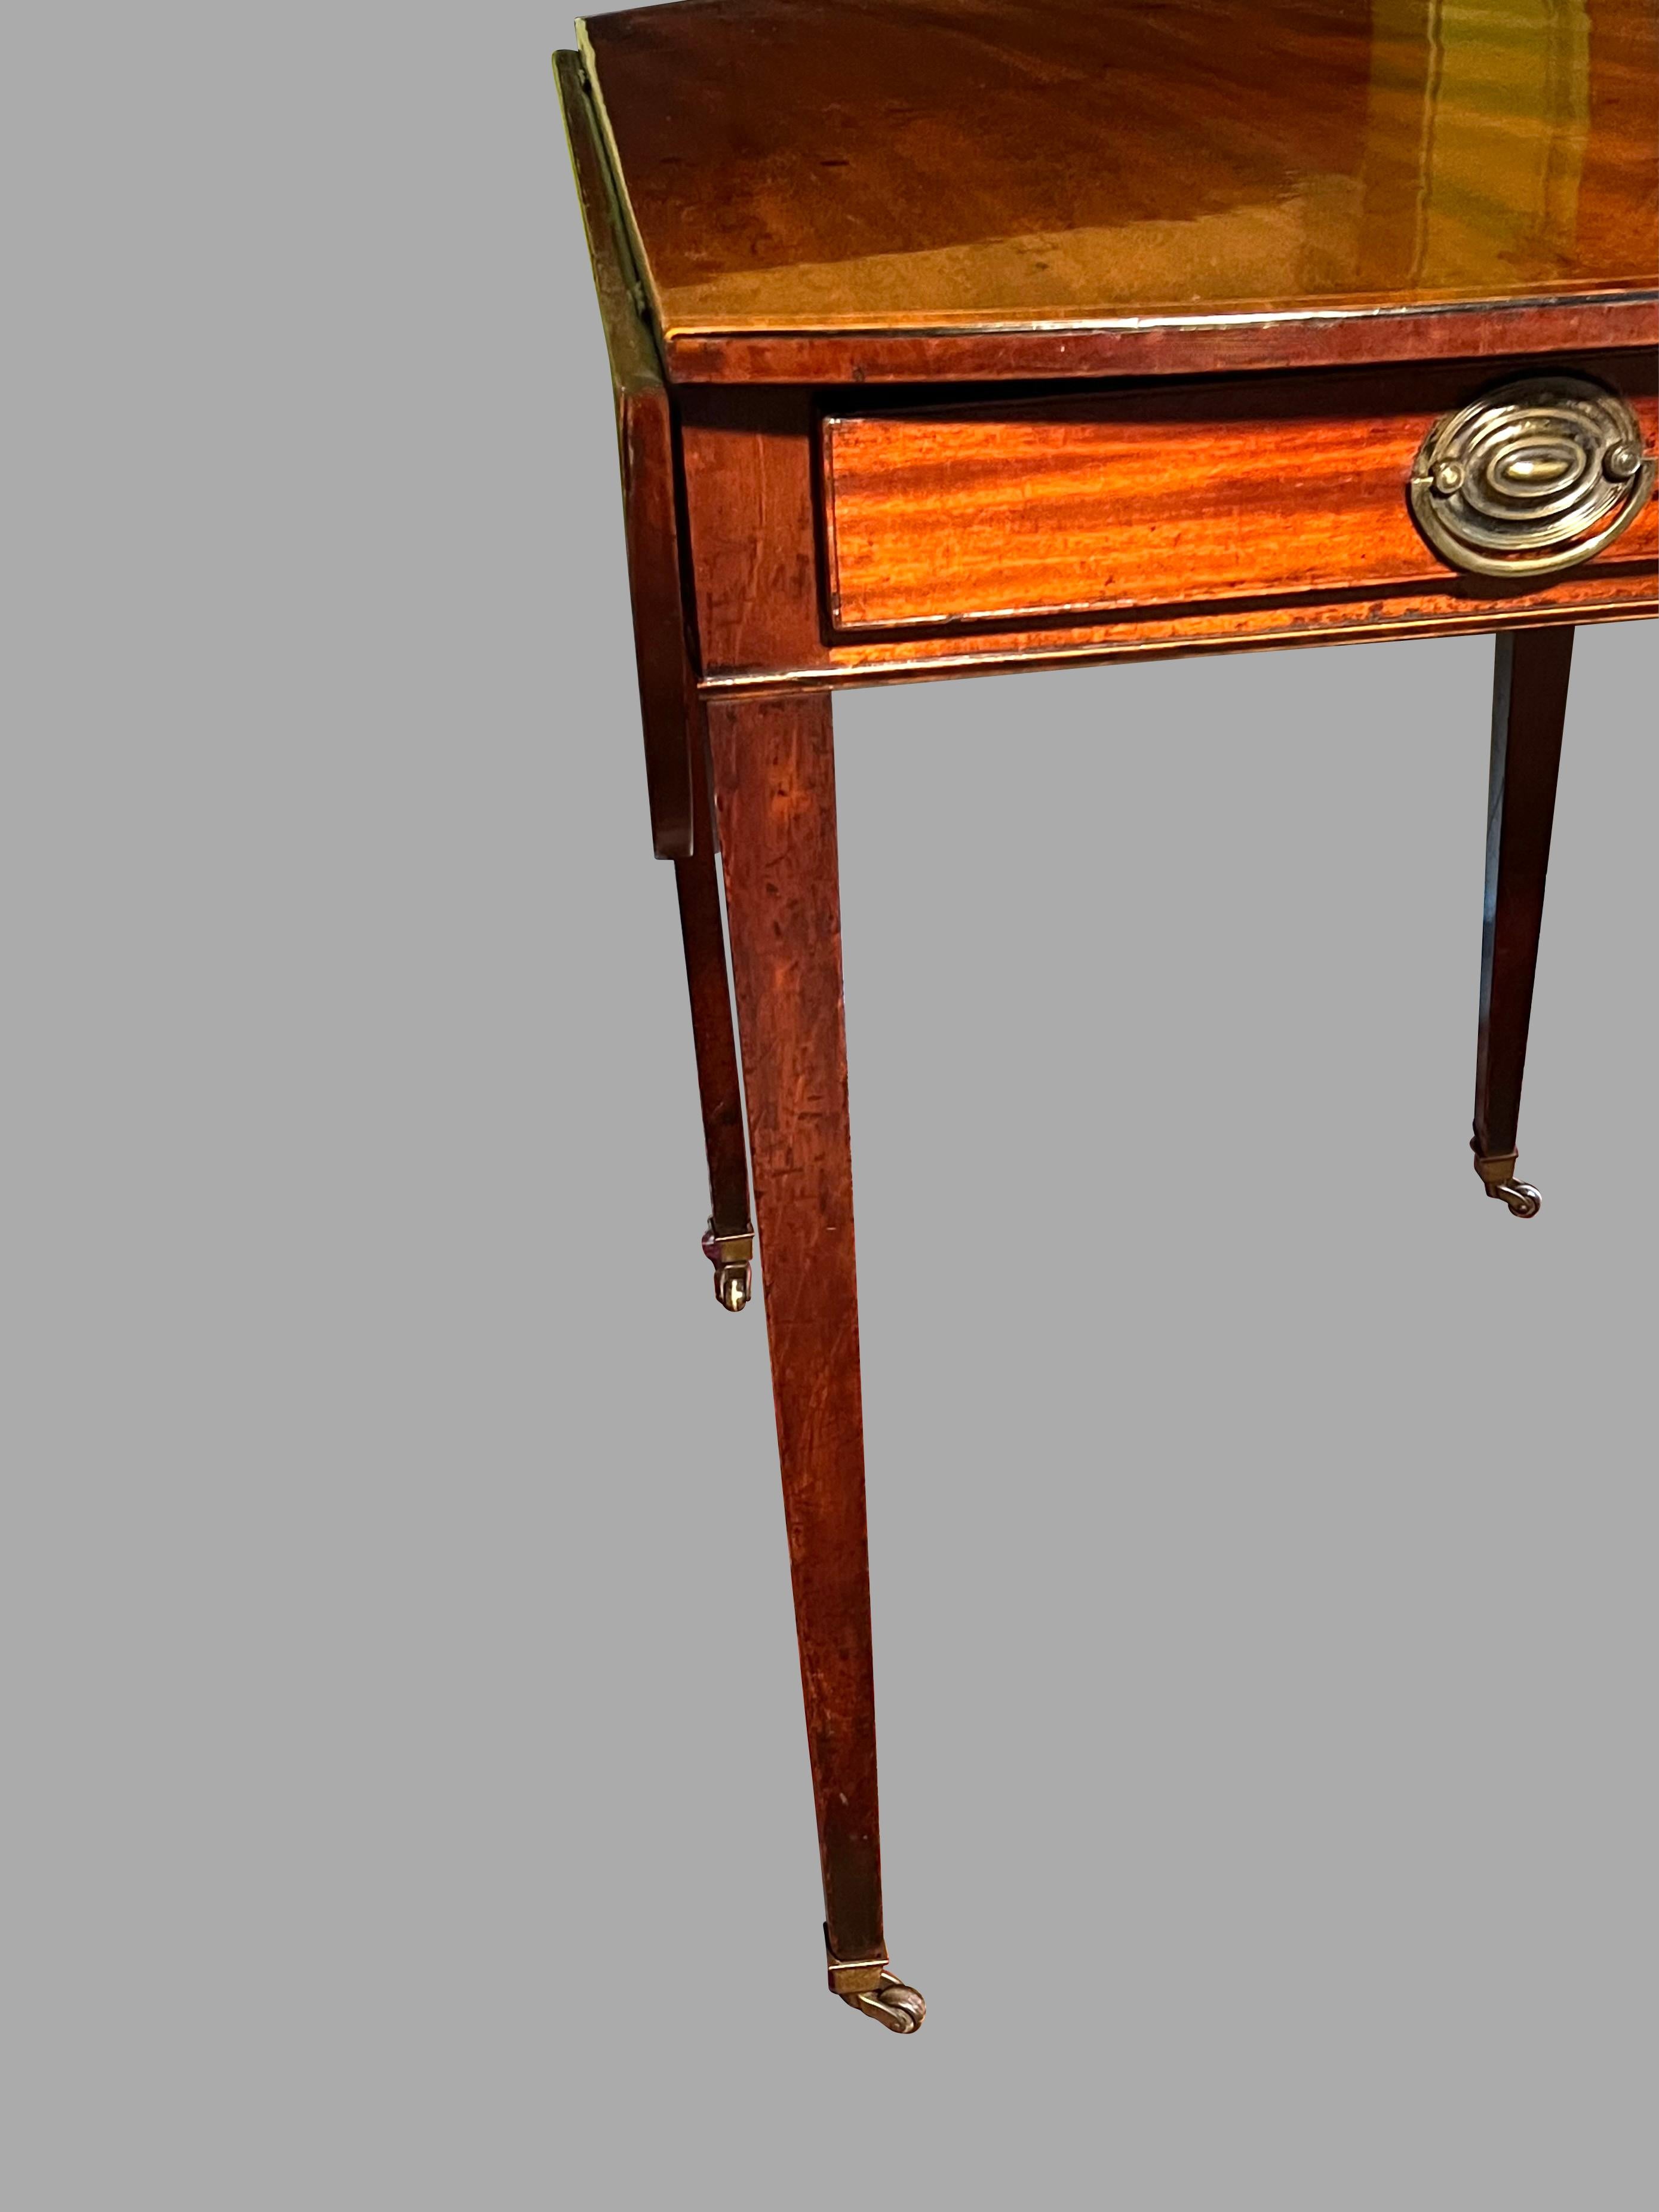 Fine English Inlaid Mahogany Hepplewhite Period Pembroke Table with Drawer For Sale 8